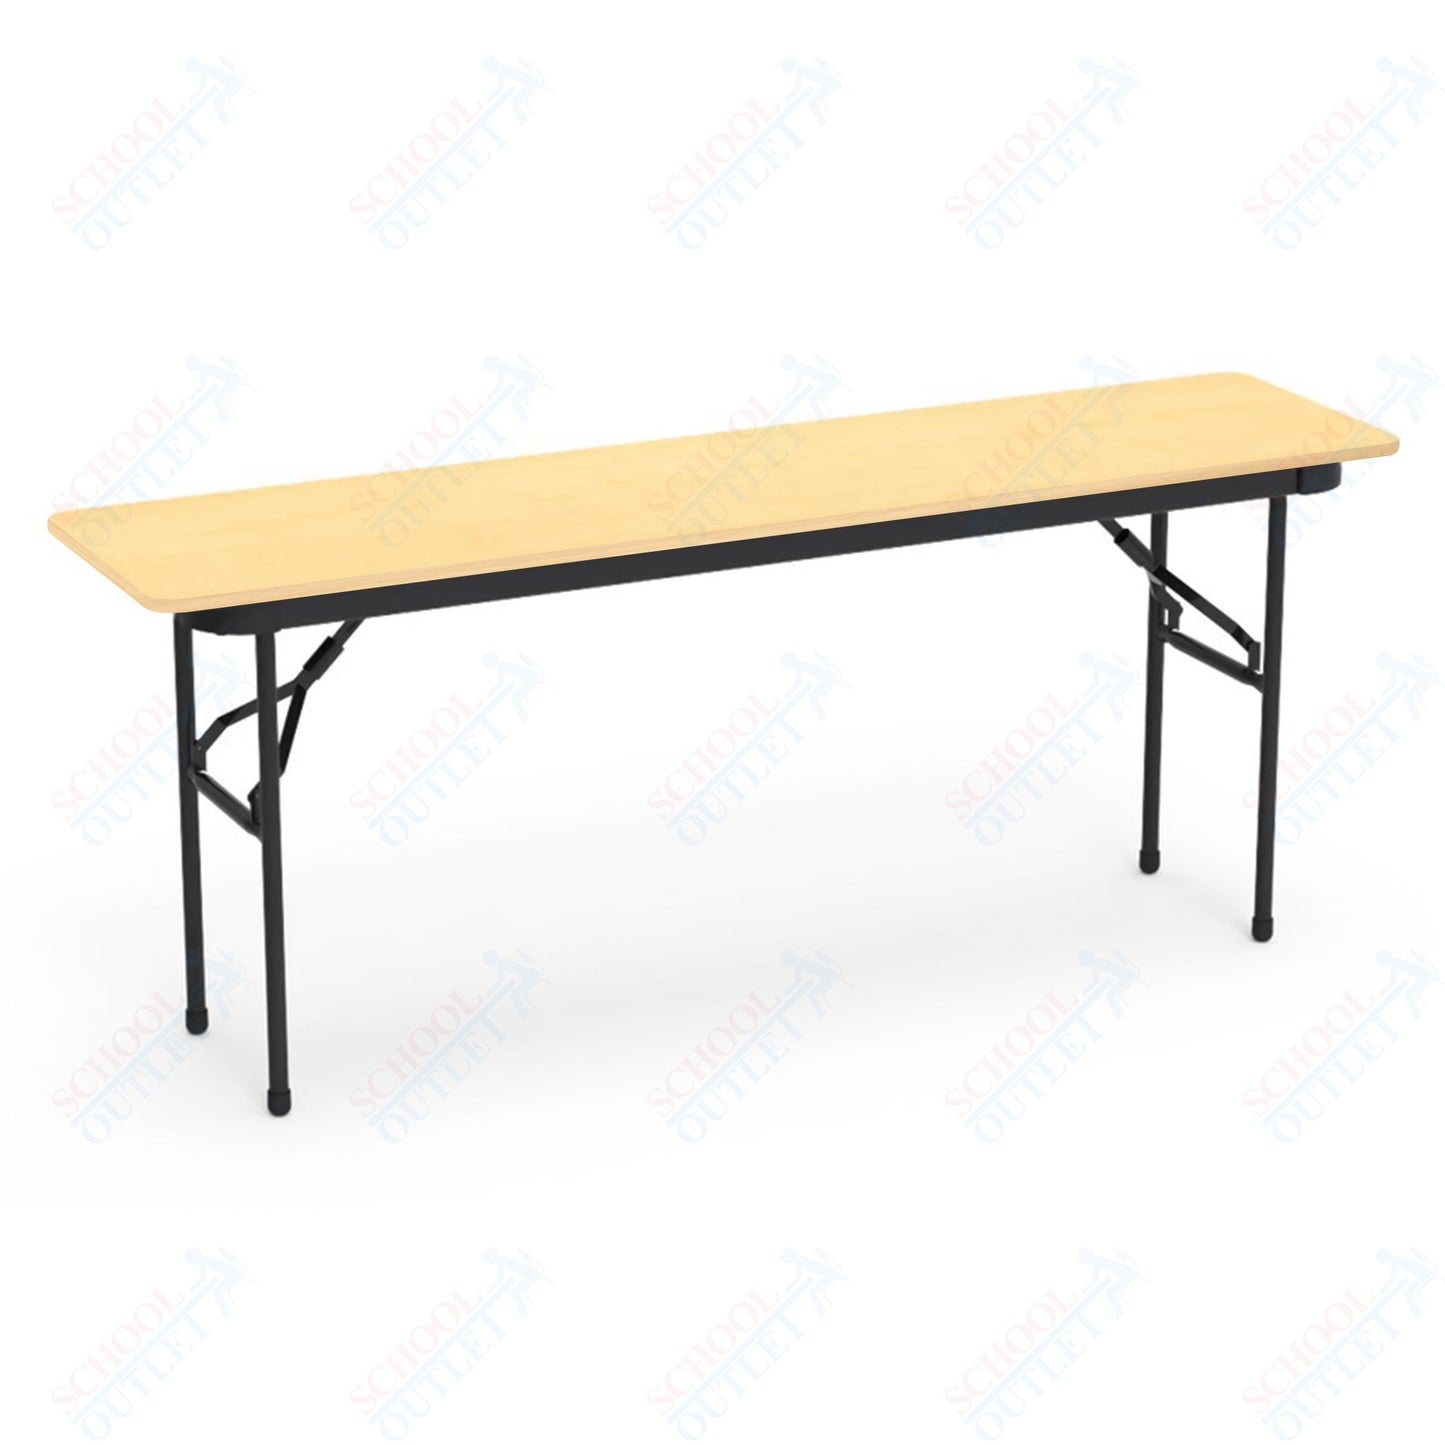 Virco 601872 - 6000 series 3/4" thick particle board folding table 18"W x 72"L